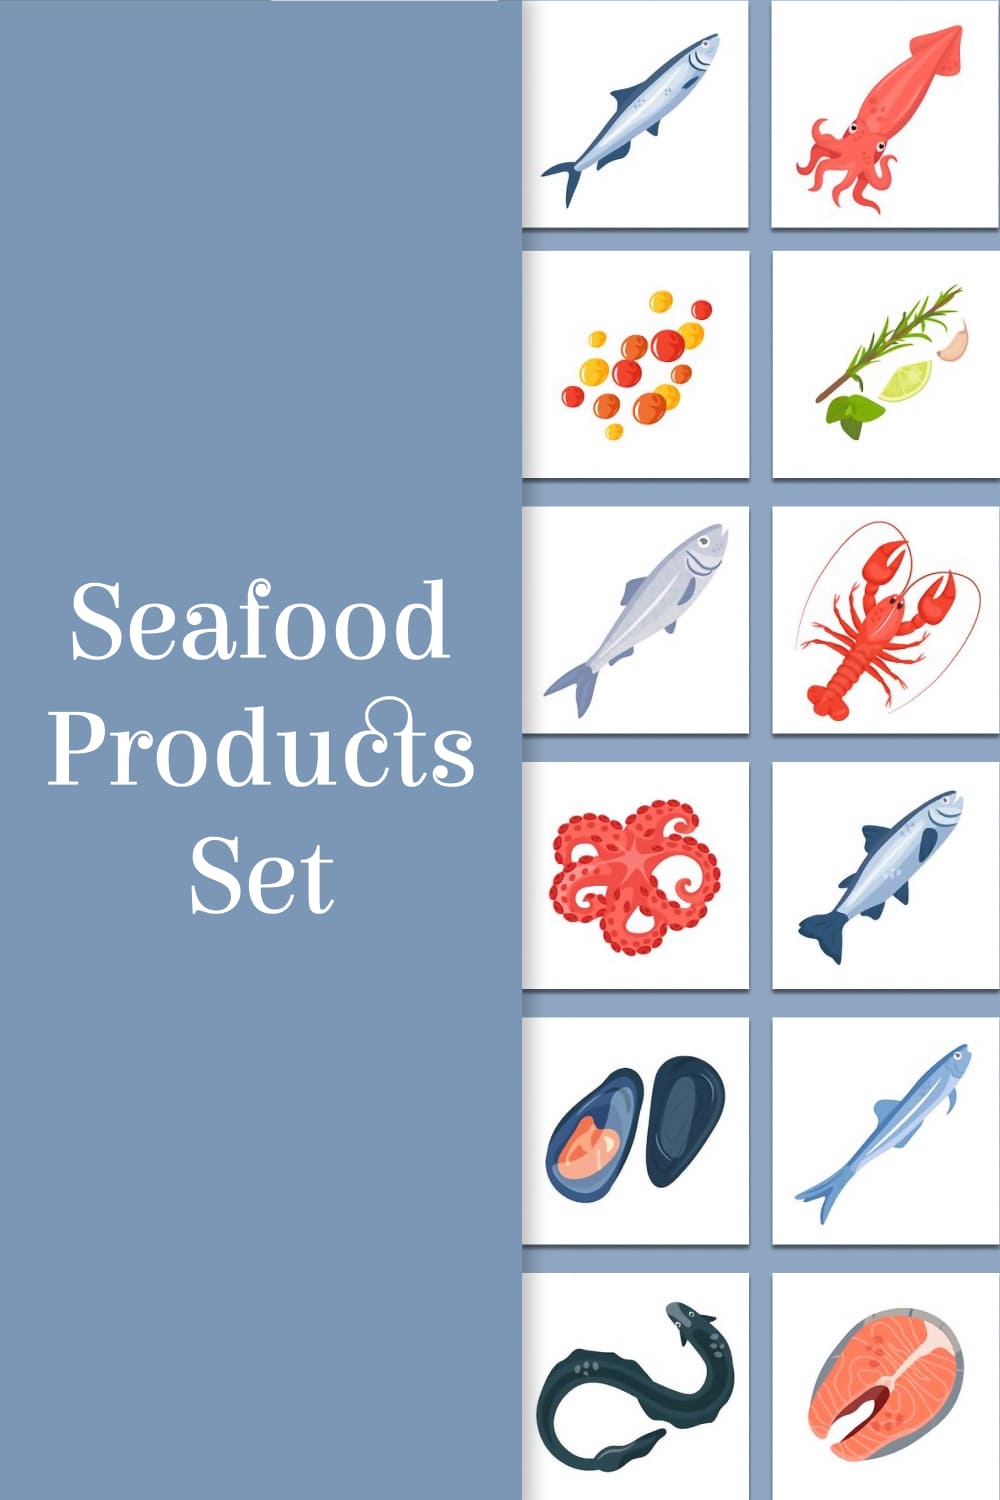 Seafood products set - pinterest image preview.